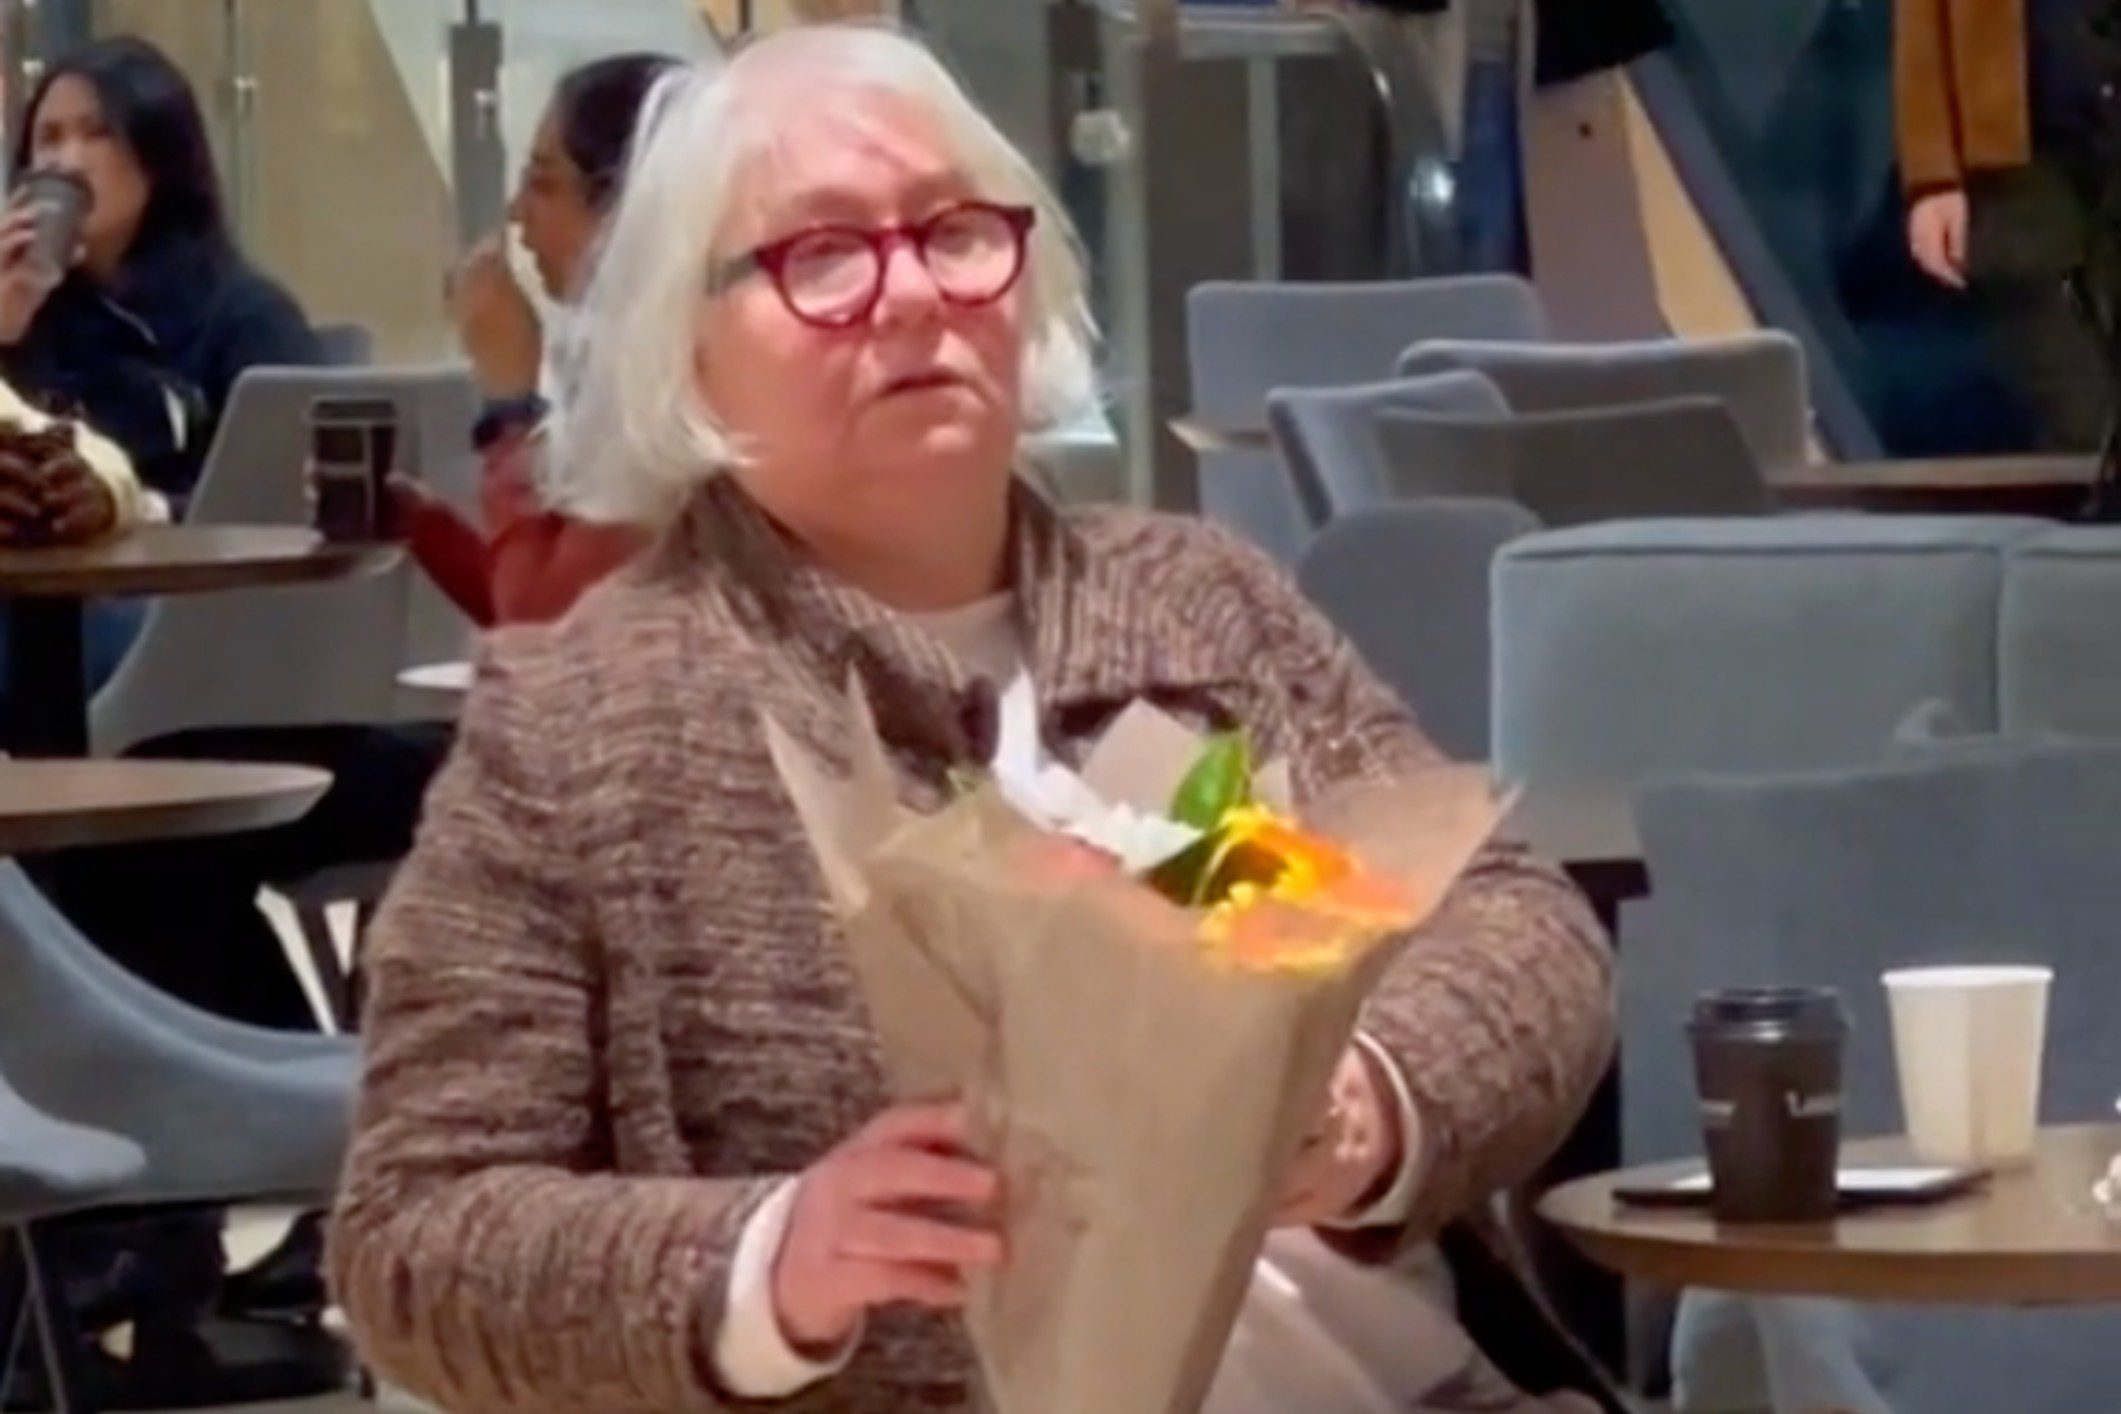 Older viewers see straight through ‘random act of kindness’ video